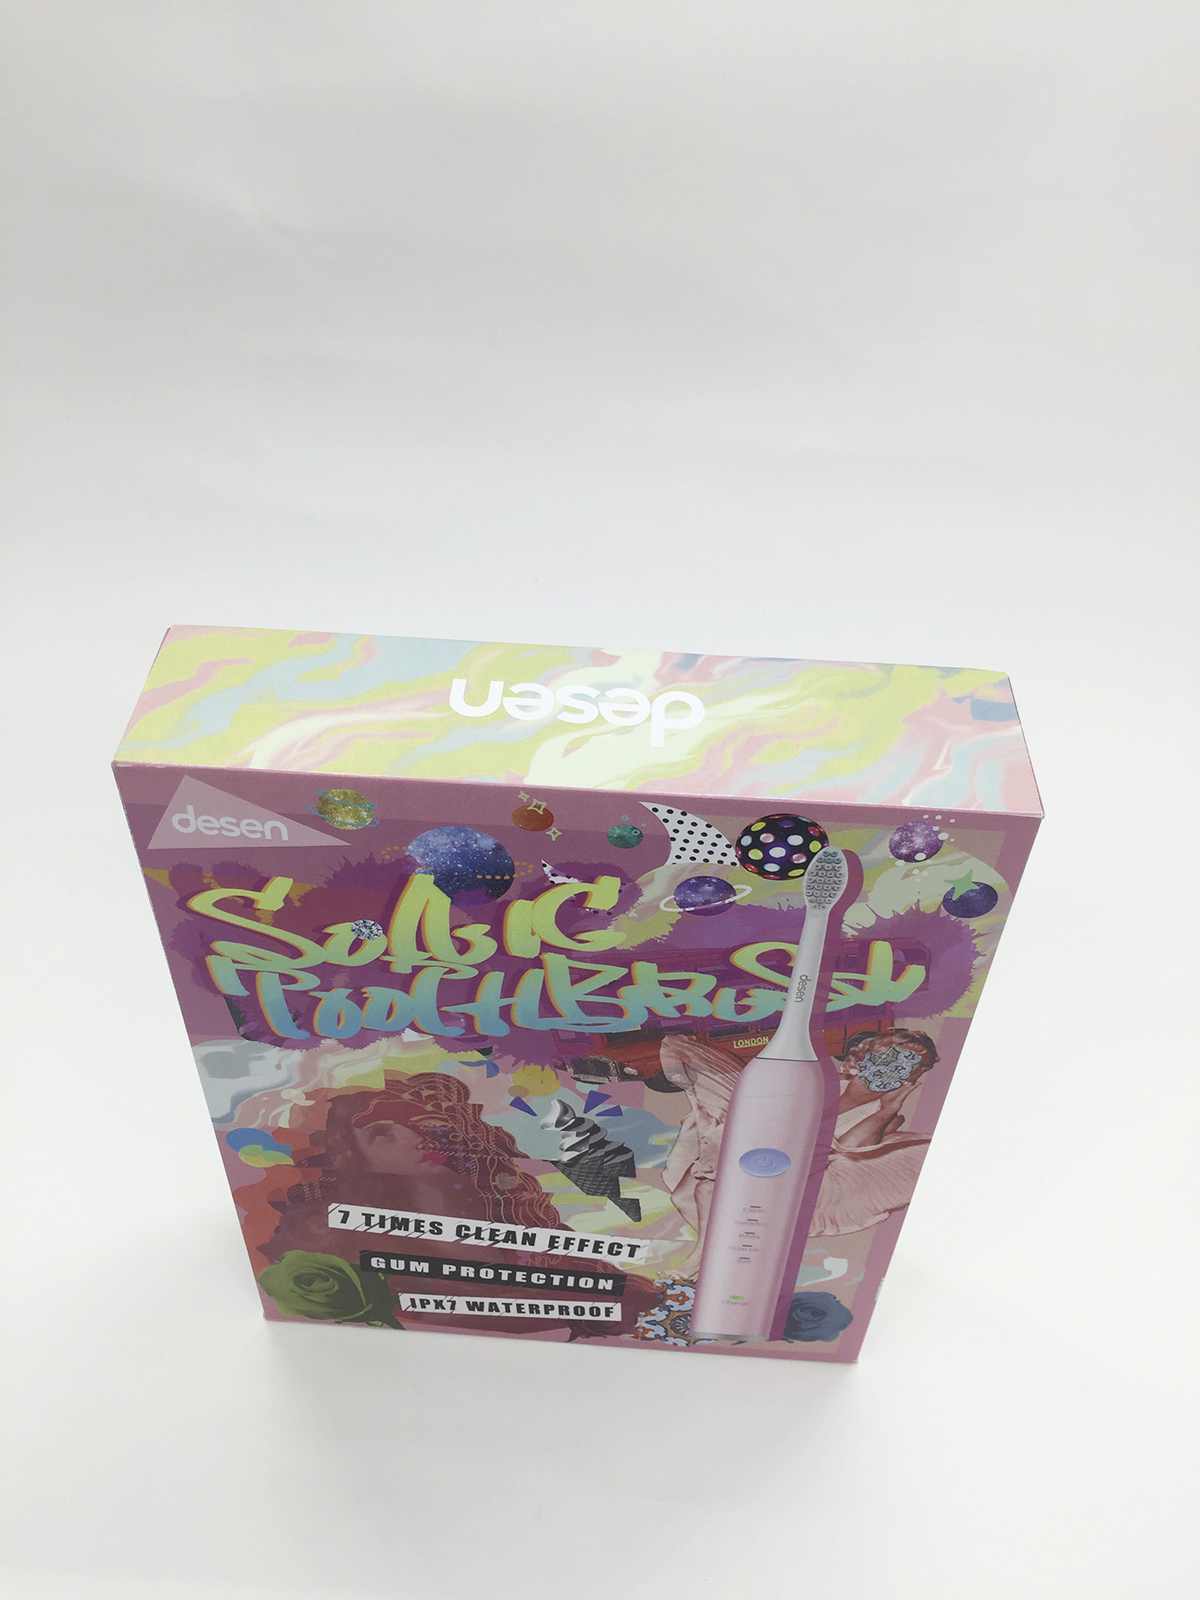 Packaging design toothbrush advertisement collage pink lettering